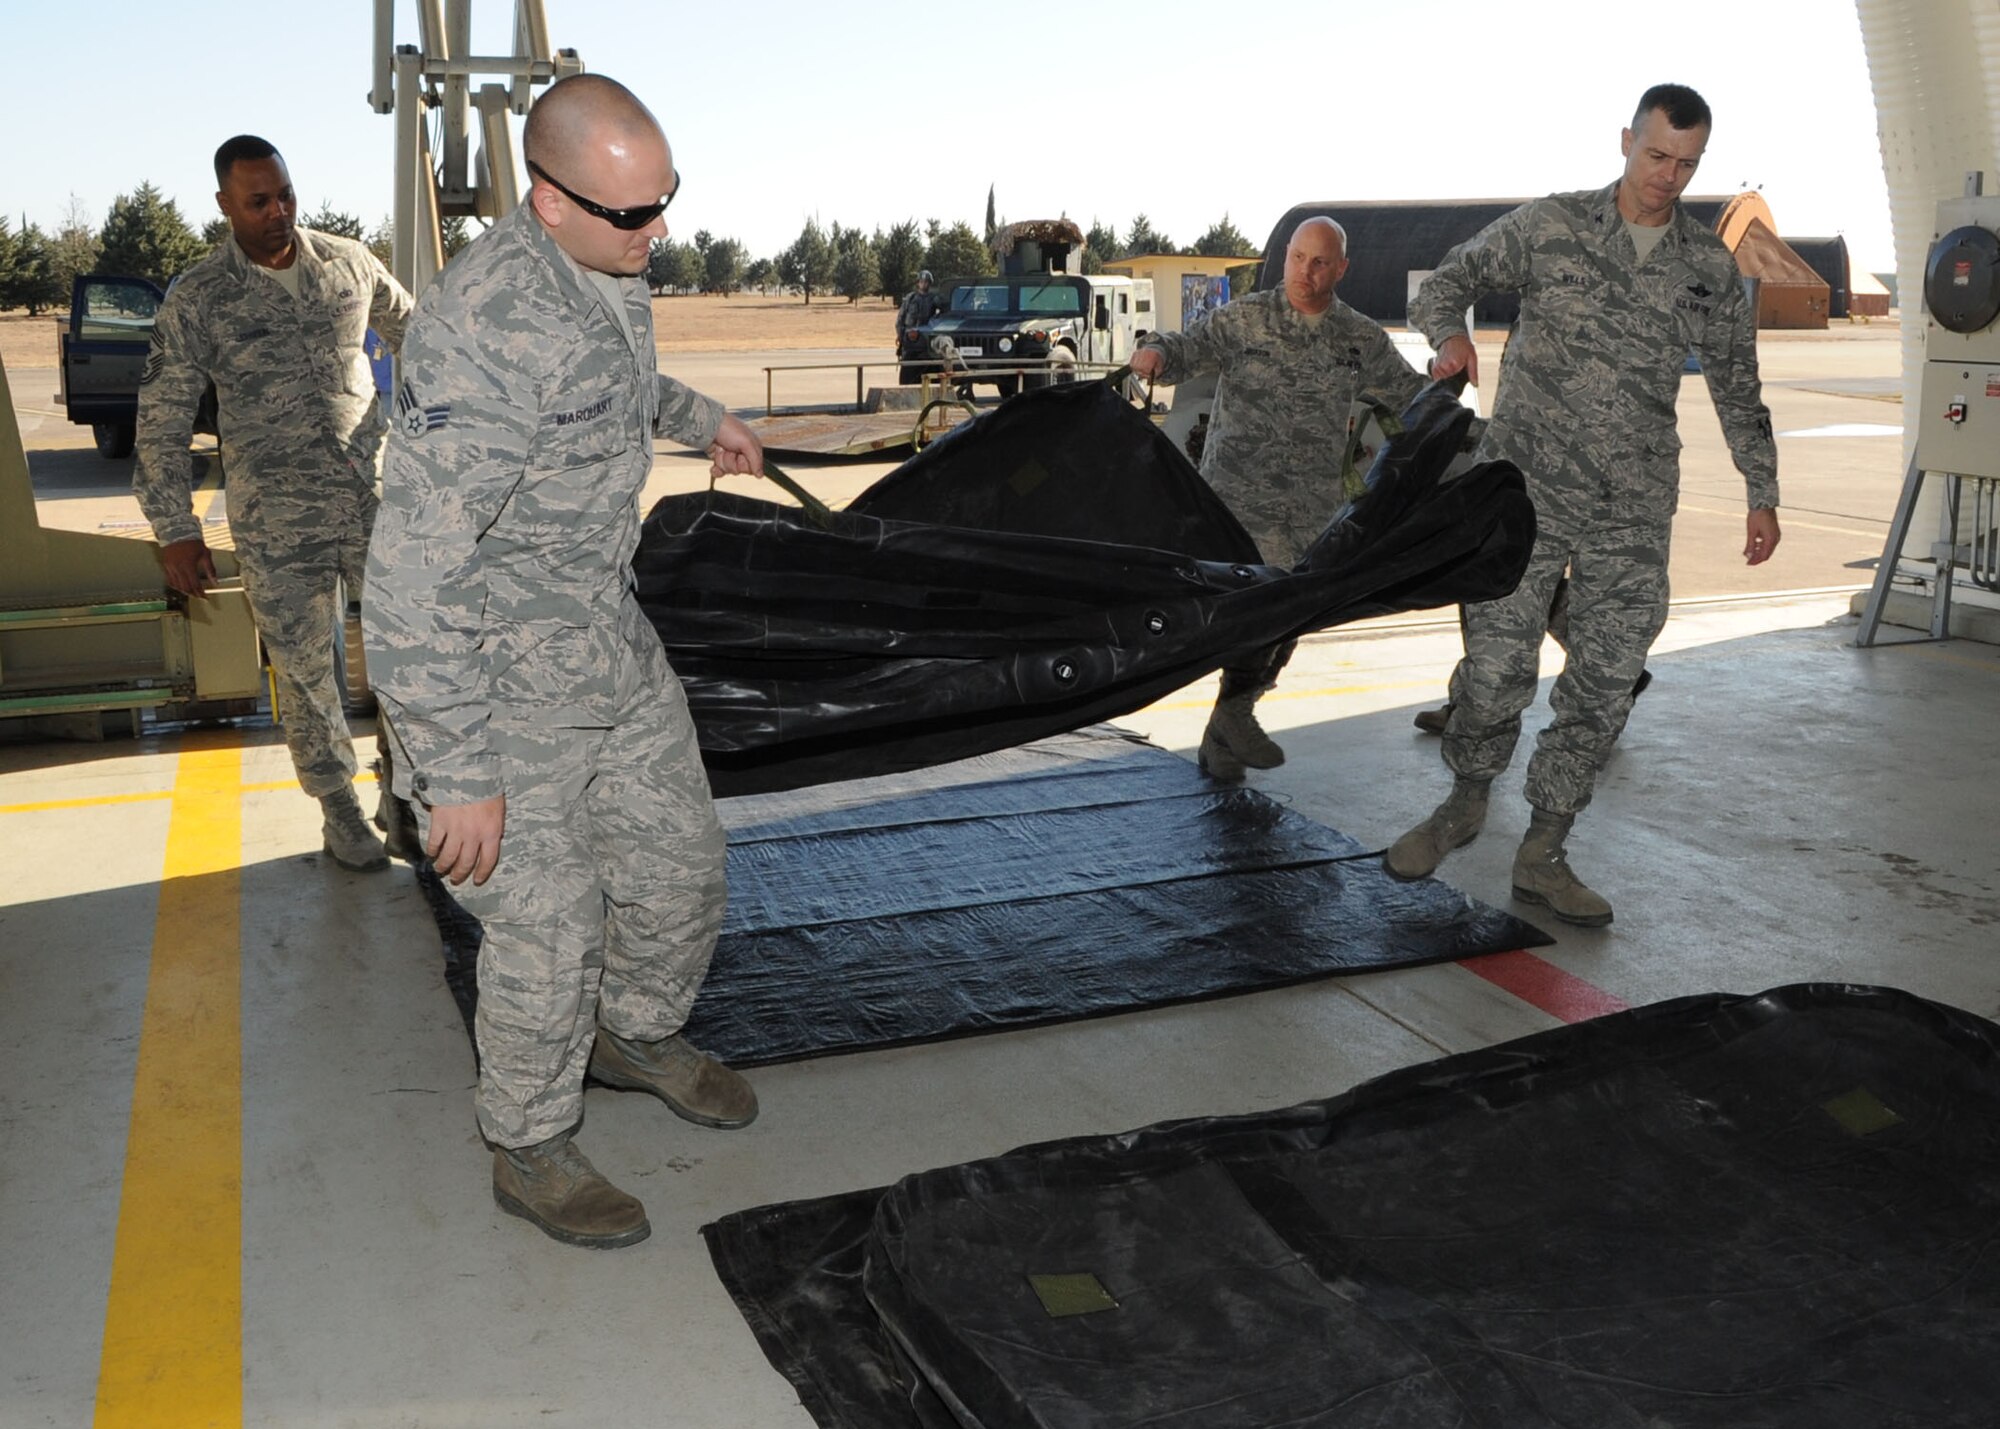 Airmen from the 39th Maintenance Squadron work with Col. Craig Wills, 39th Air Base Wing commander, and Chief Master Sgt. Anthony Johnson, 39th ABW command chief to move a pneumatic airbag in place as a demonstration of the squadrons Crash Disabled Damaged Aircraft Recovery capability Jan. 23, 2014, at Incirlik Air Base, Turkey. (U.S. Air Force photo by Staff Sgt. Veronica Pierce/Released) 